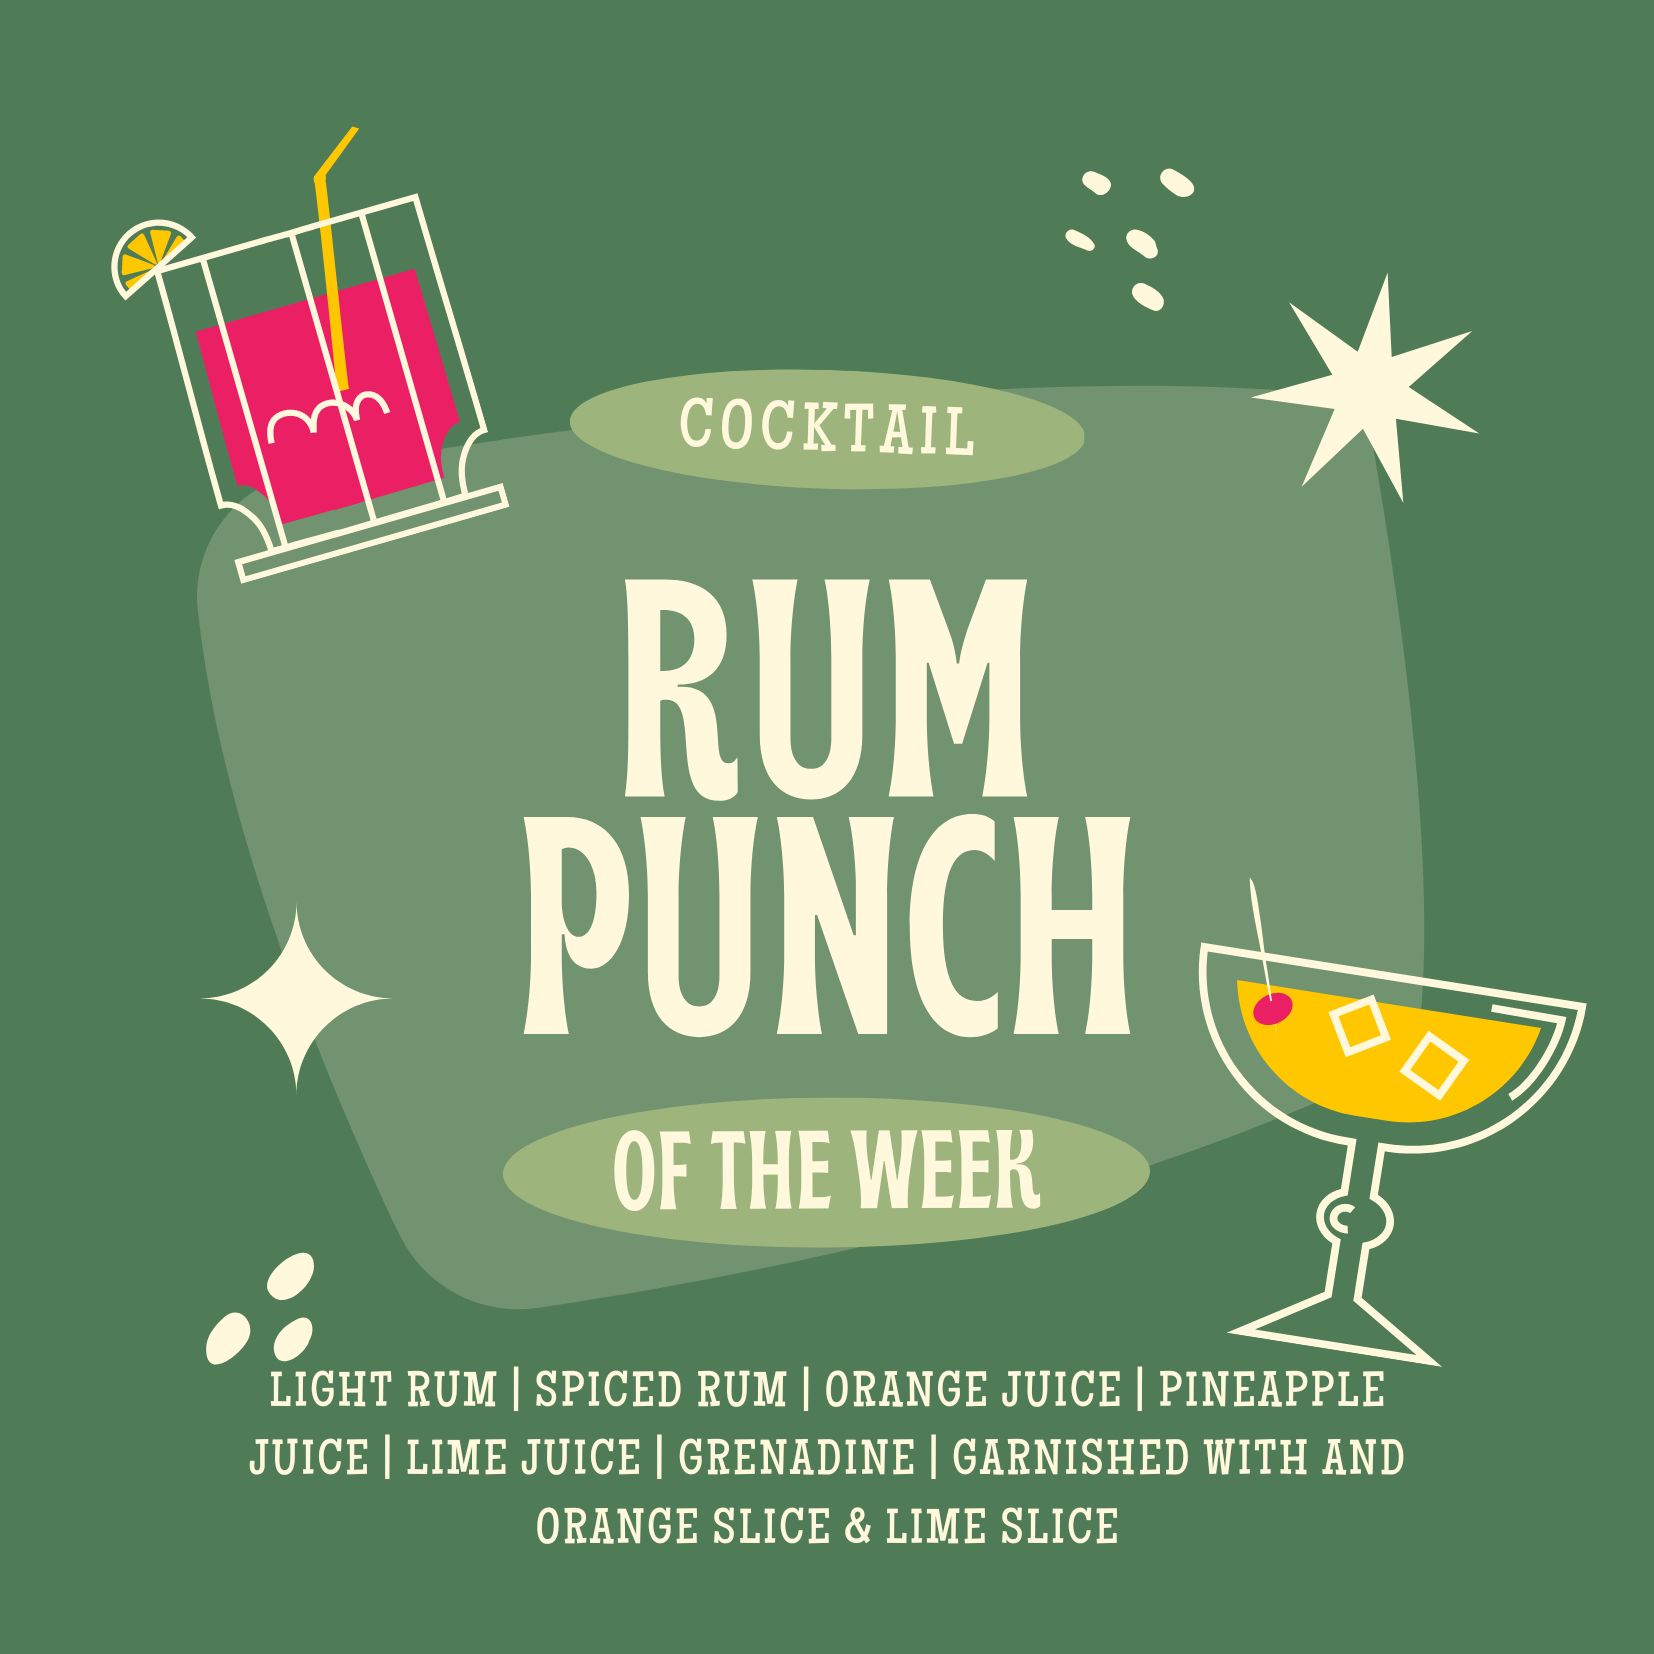 RUM PUNCH IS THE COCKTAIL OF THE WEEK AT HEMAUER BREWING CO.